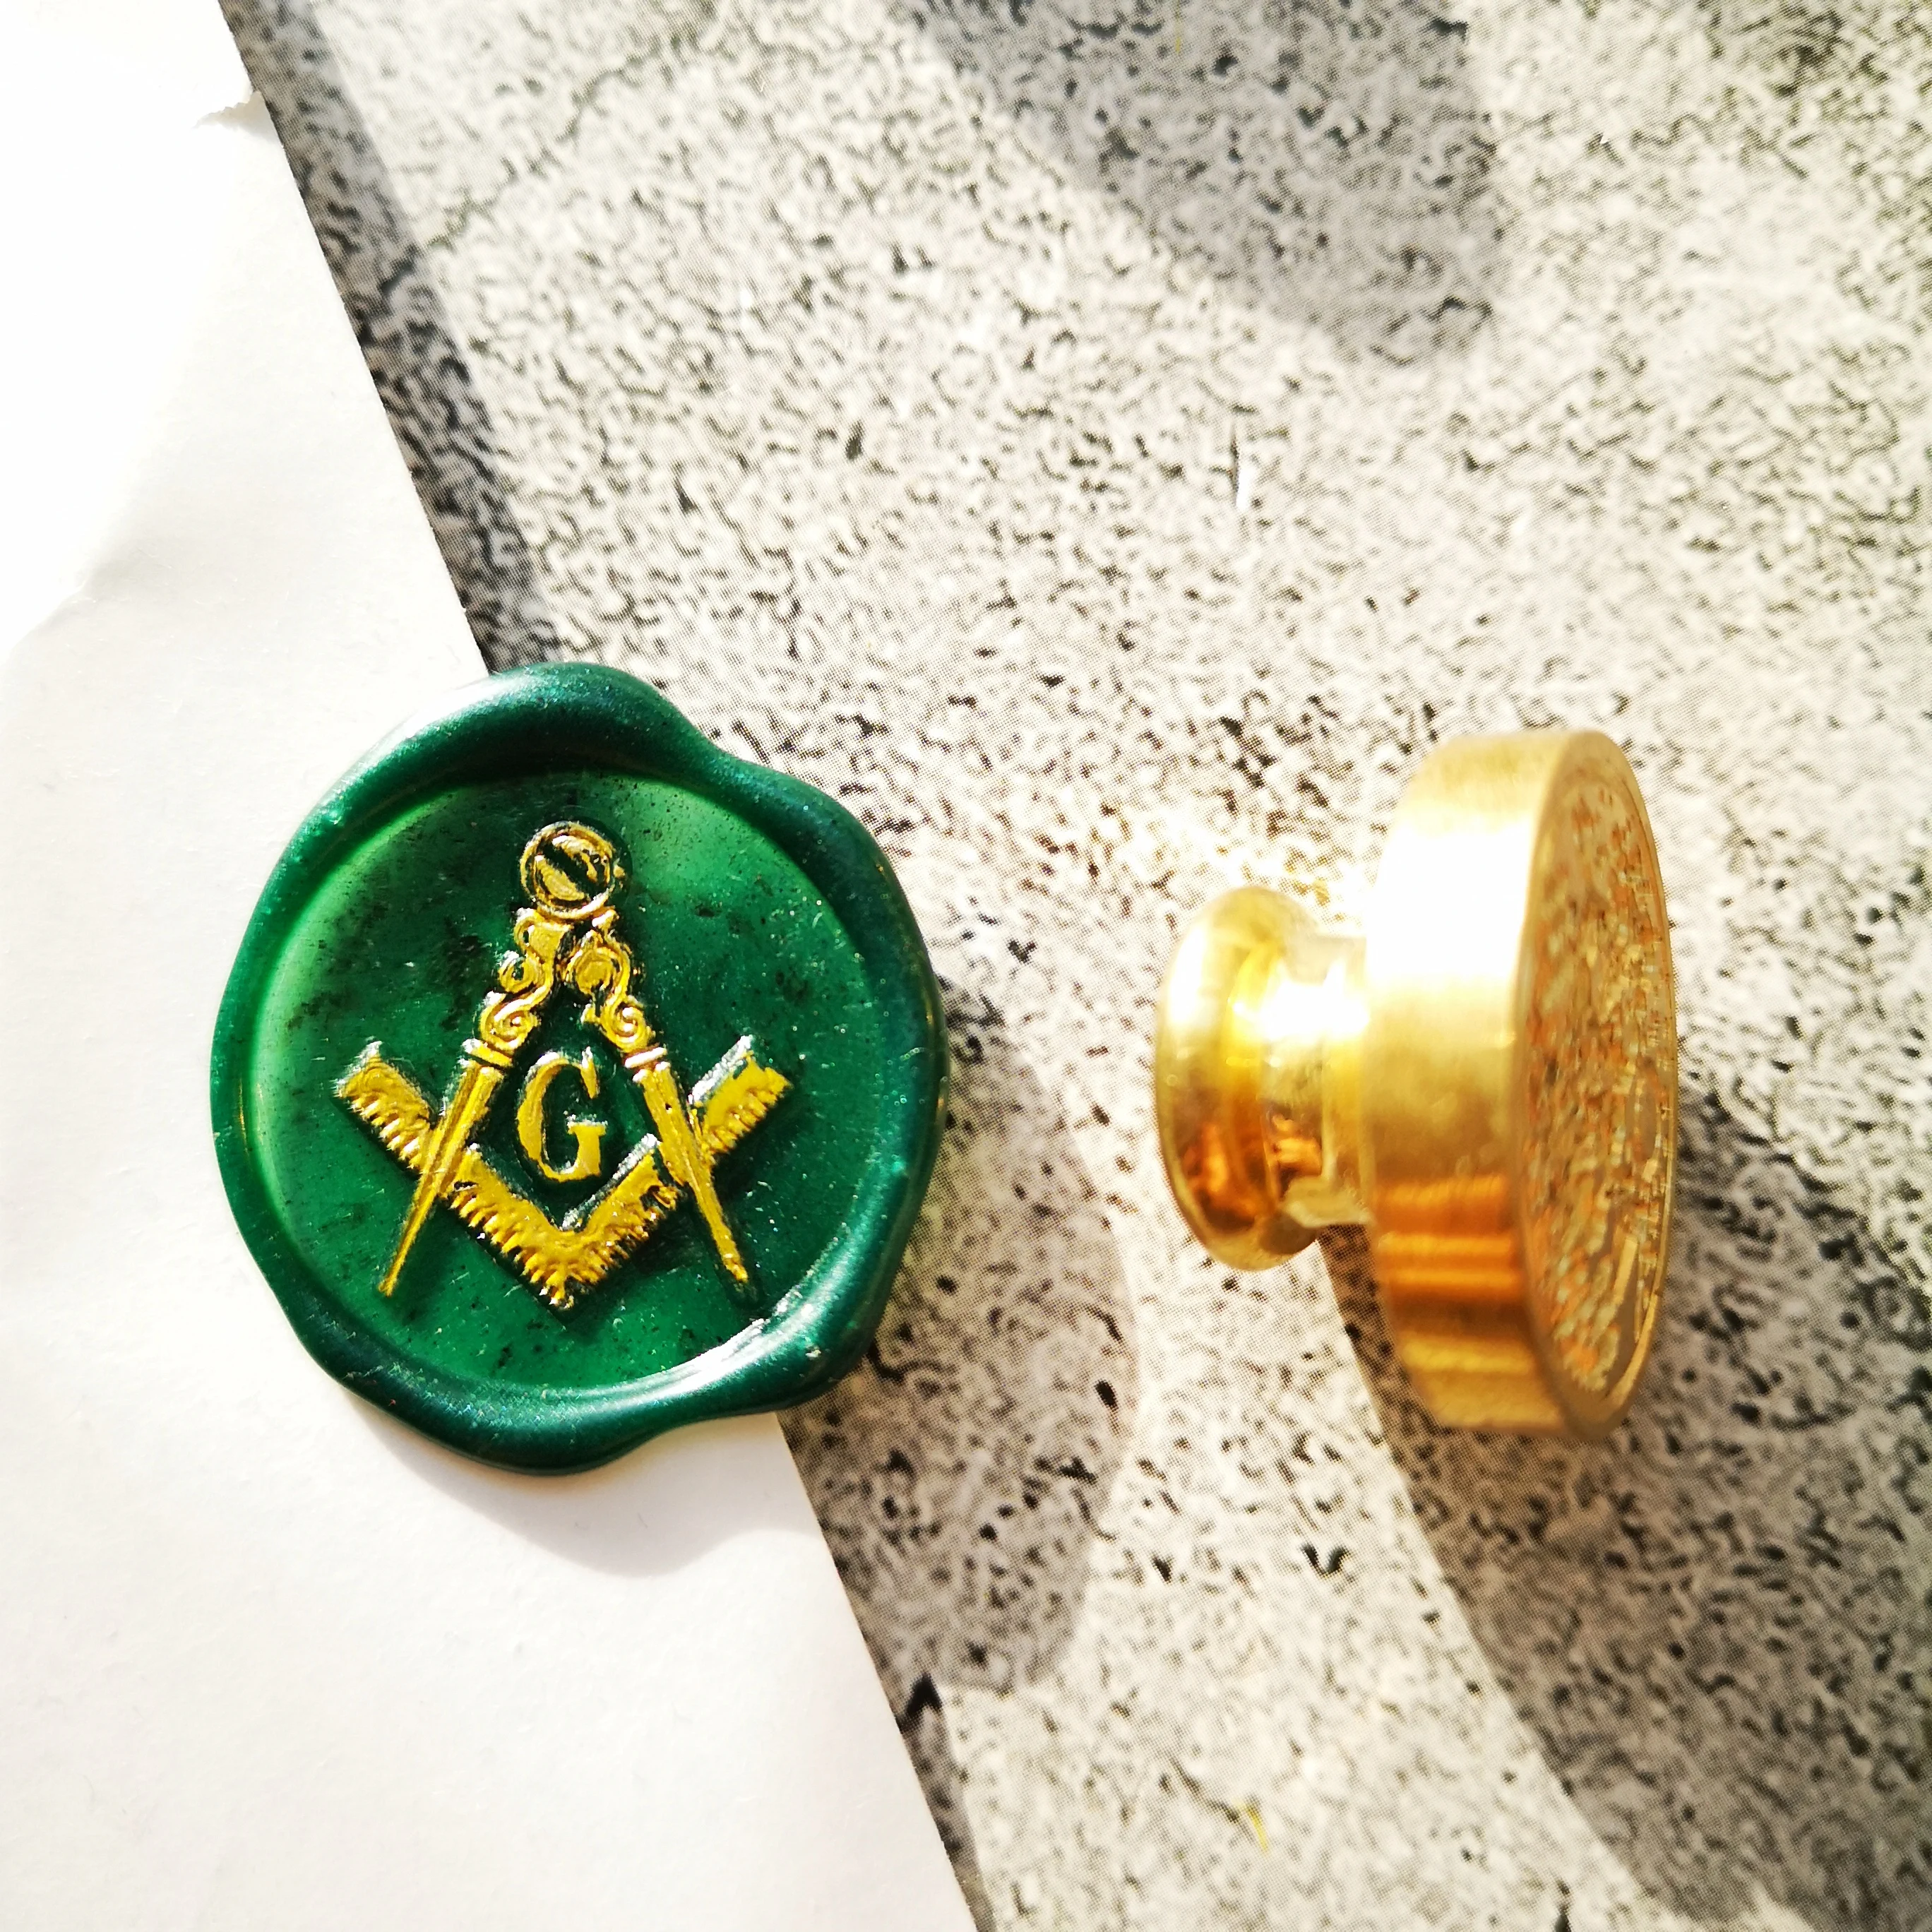 New Free-Mason Free and Accepted Masons logo The Mason's Symbo Compasses trisquare Letter G wax seal stamp sealing | Дом и сад